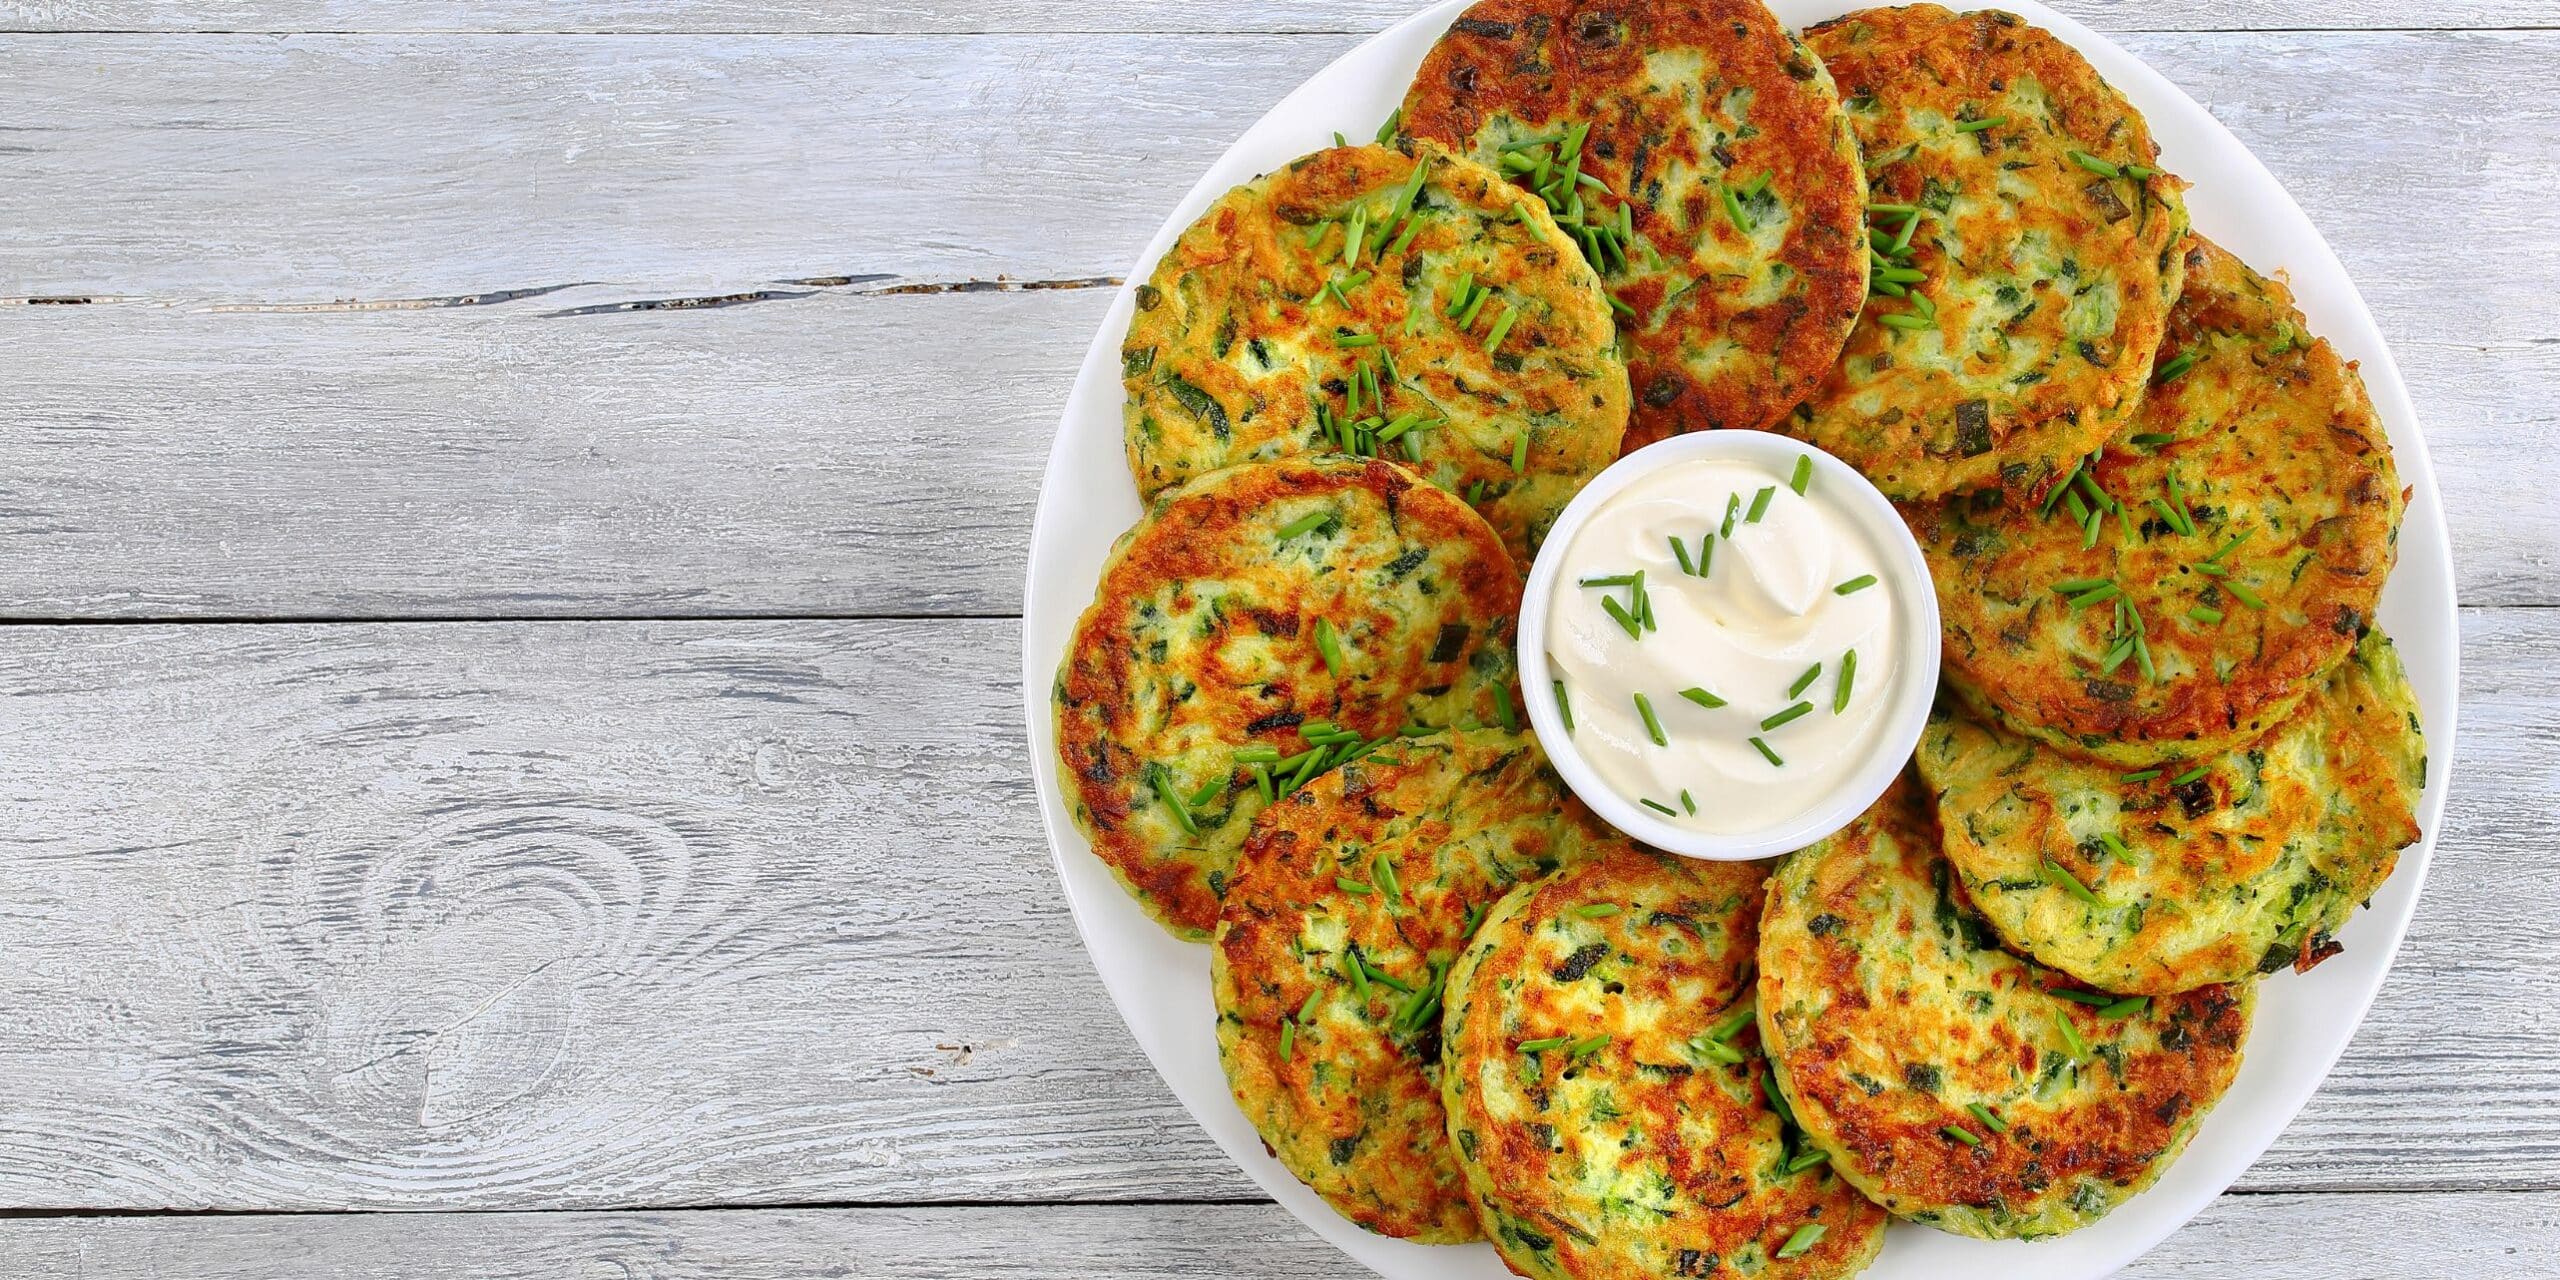 kohlrabi cakes with sour cream and dill dipping sauce